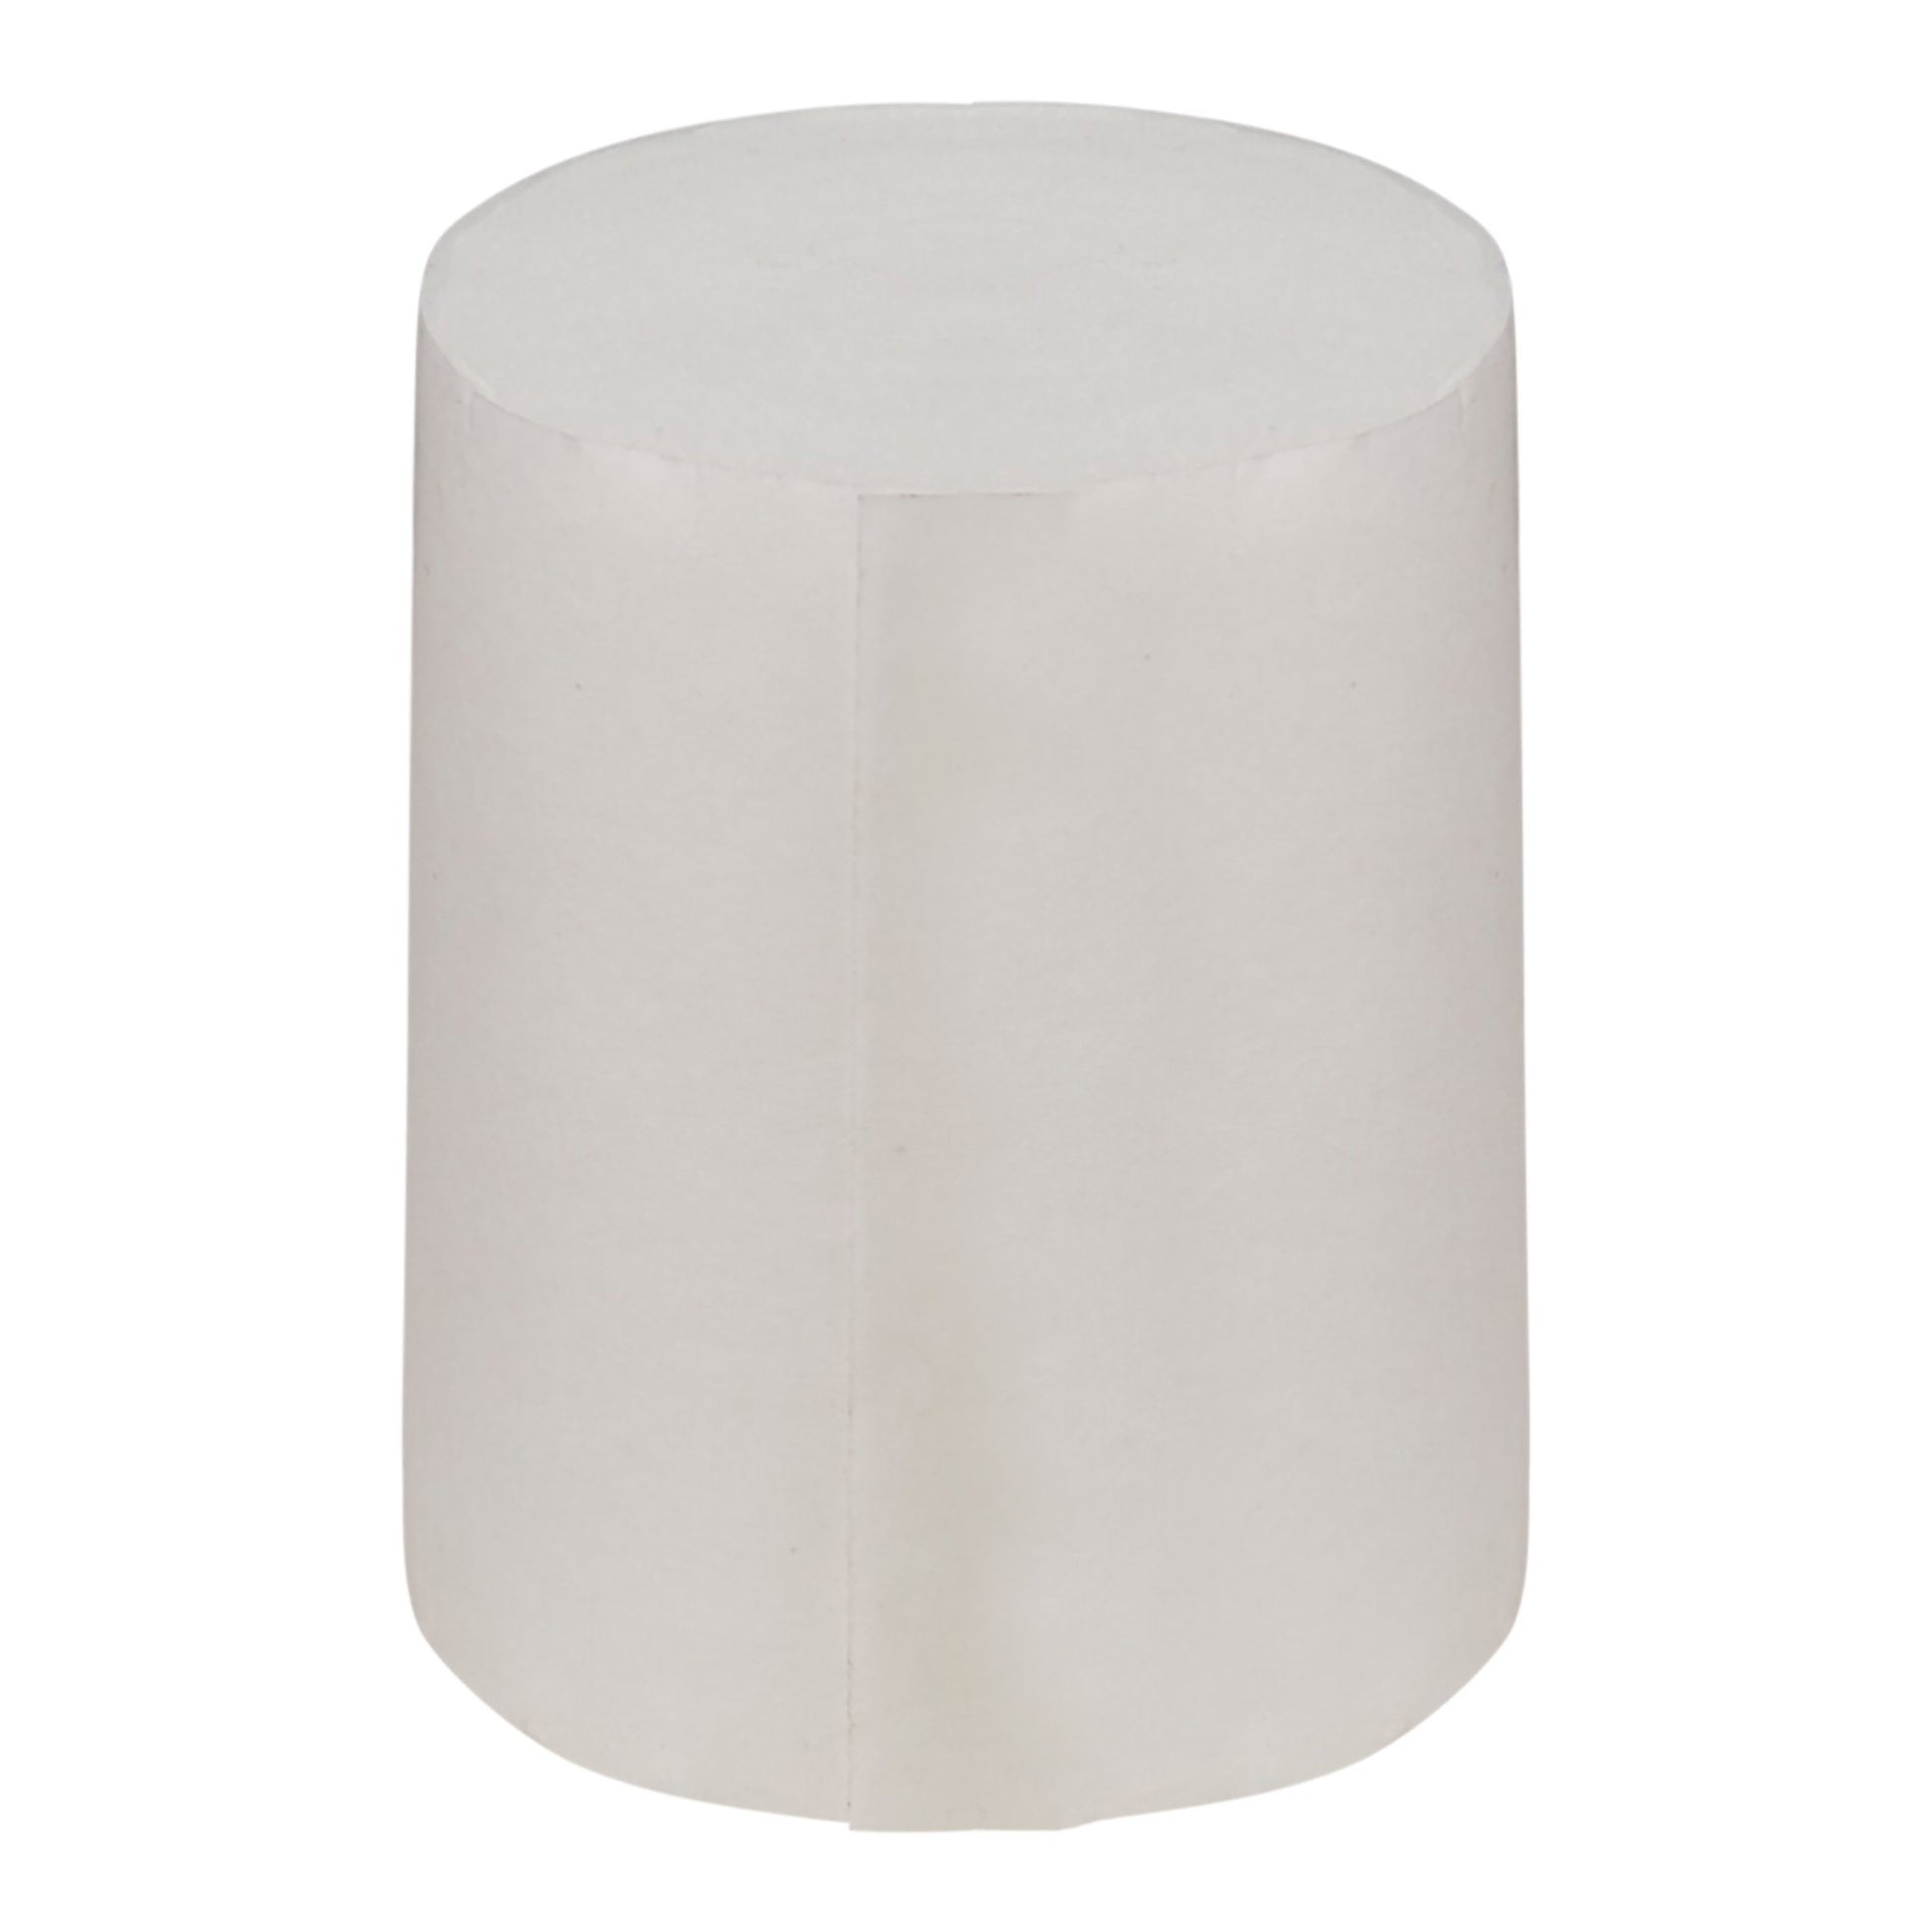 3M™ Synthetic White Polyester Undercast Cast Padding, 3 Inch X 4 Yard, Sold As 80/Case 3M Cmw03